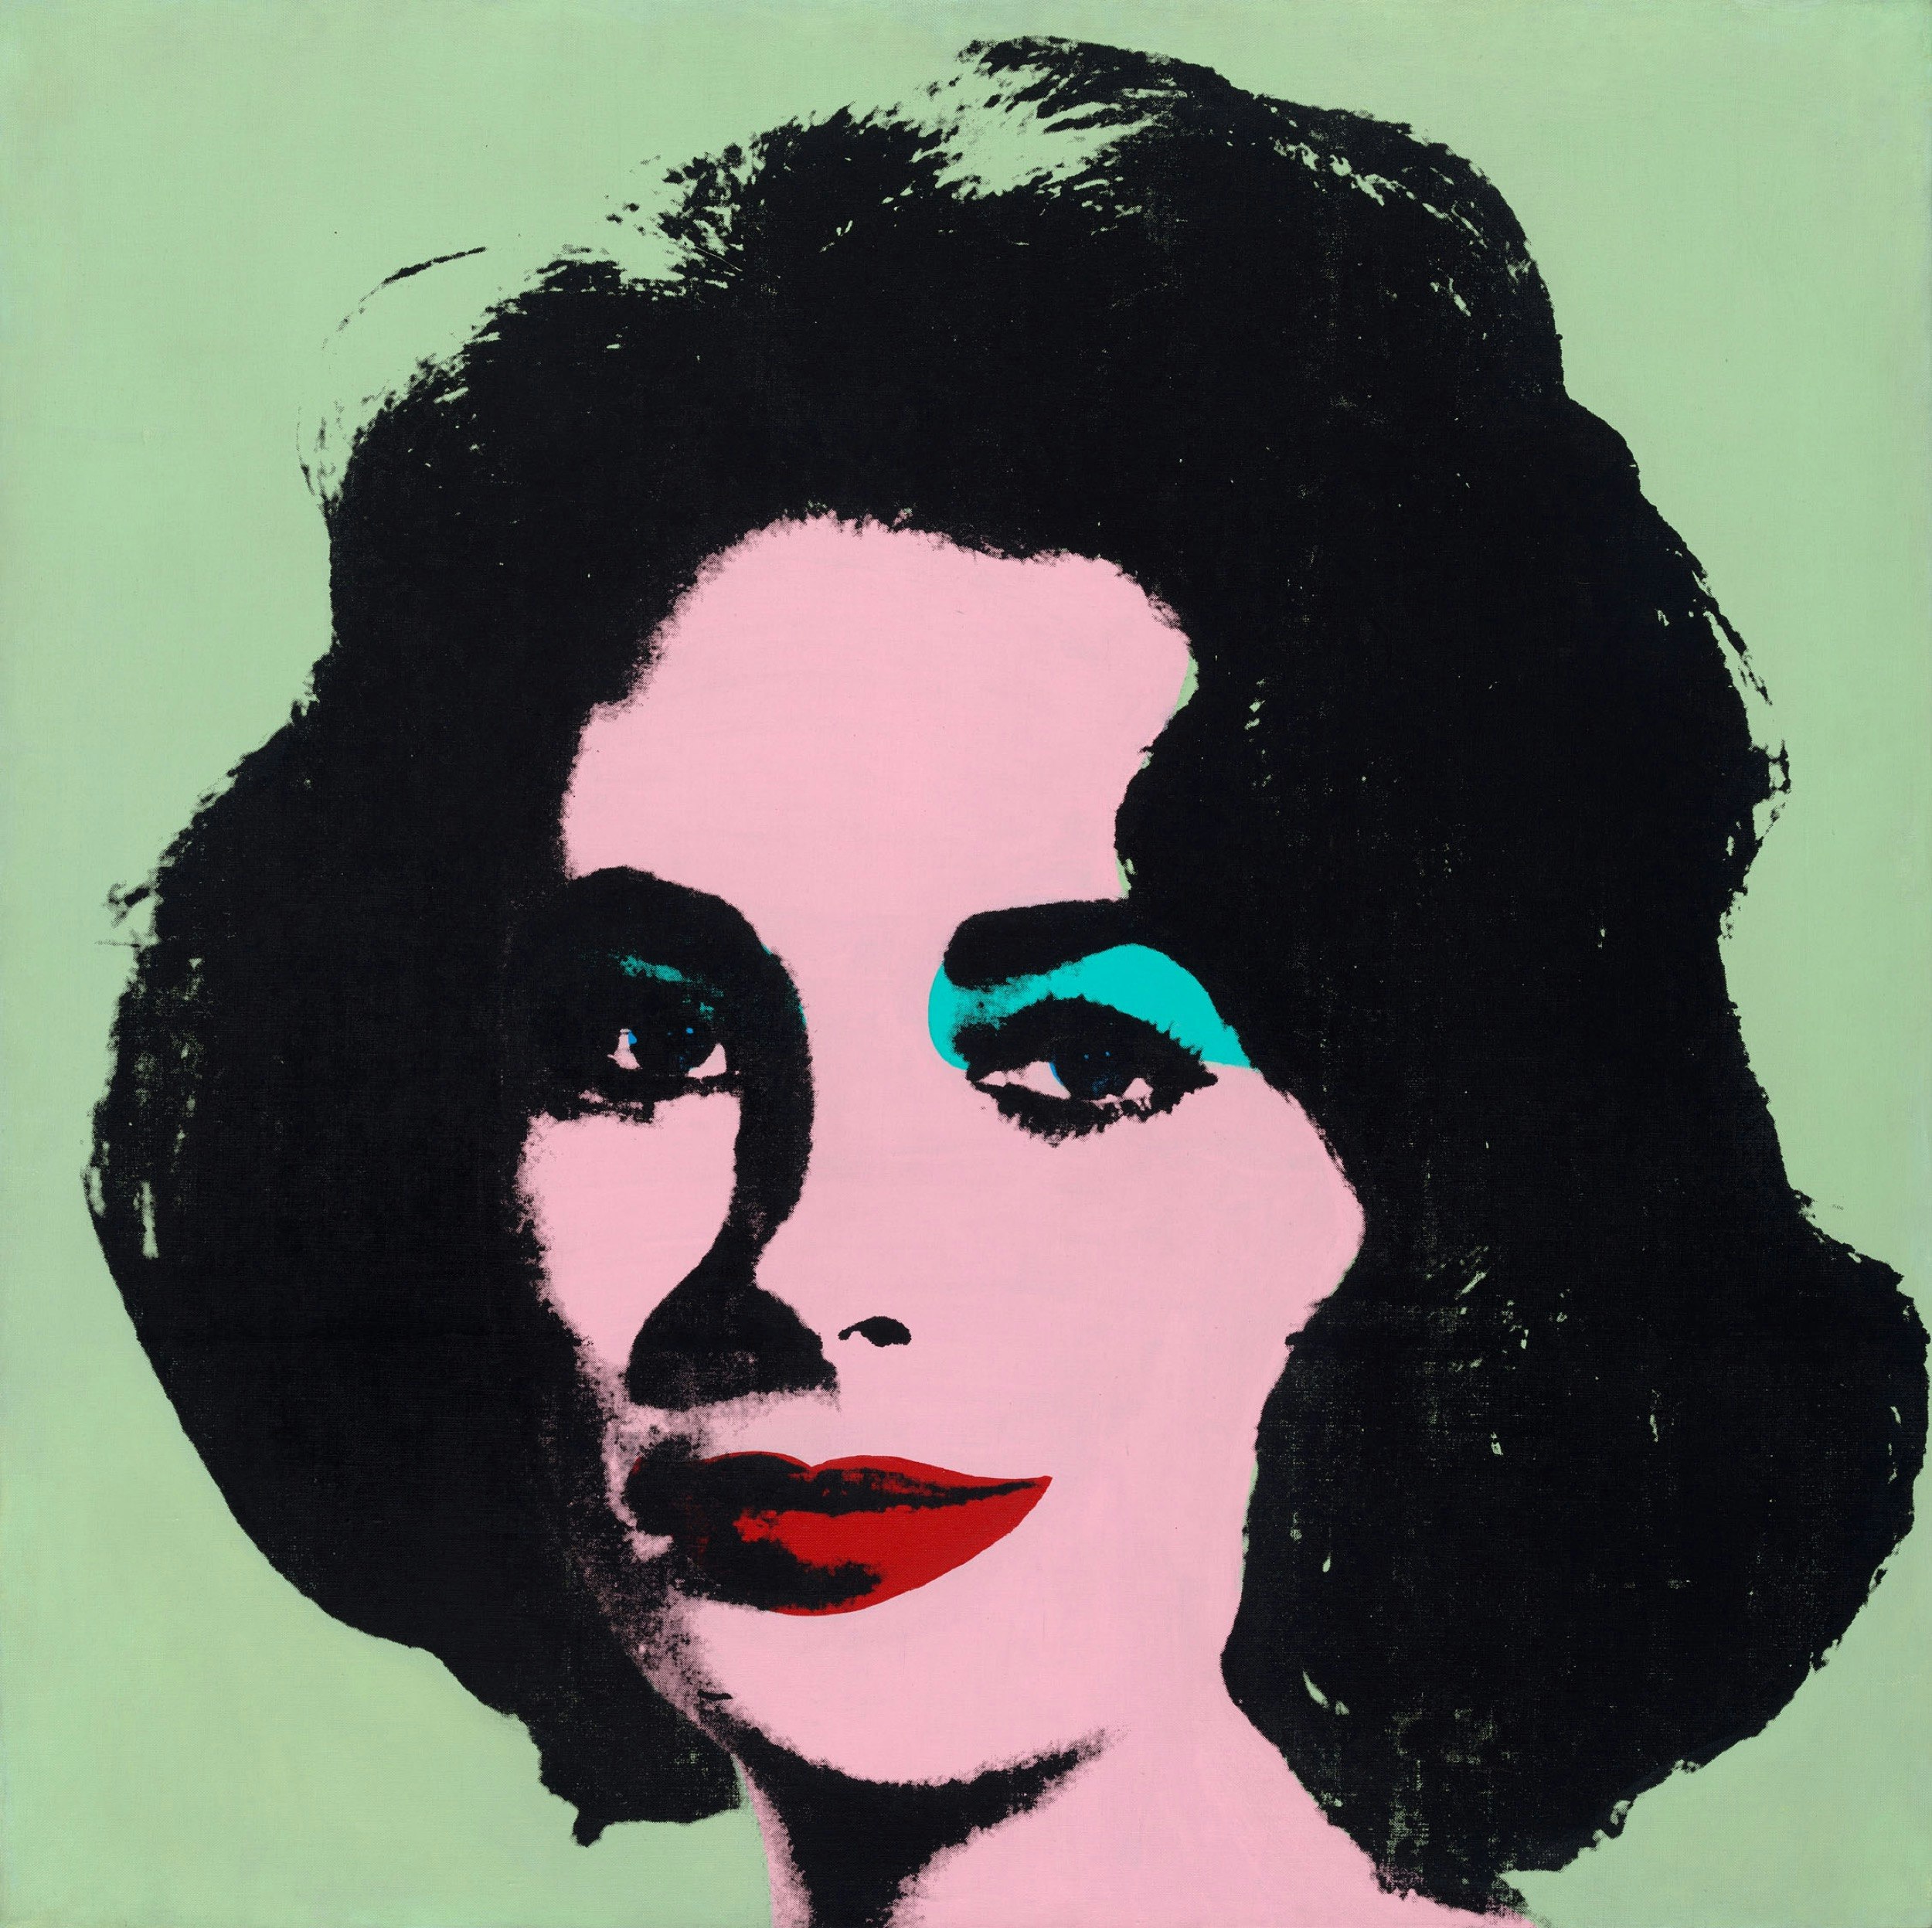 A screen printed portrait of Elizabeth Taylor with garish colors; Warhol in the US